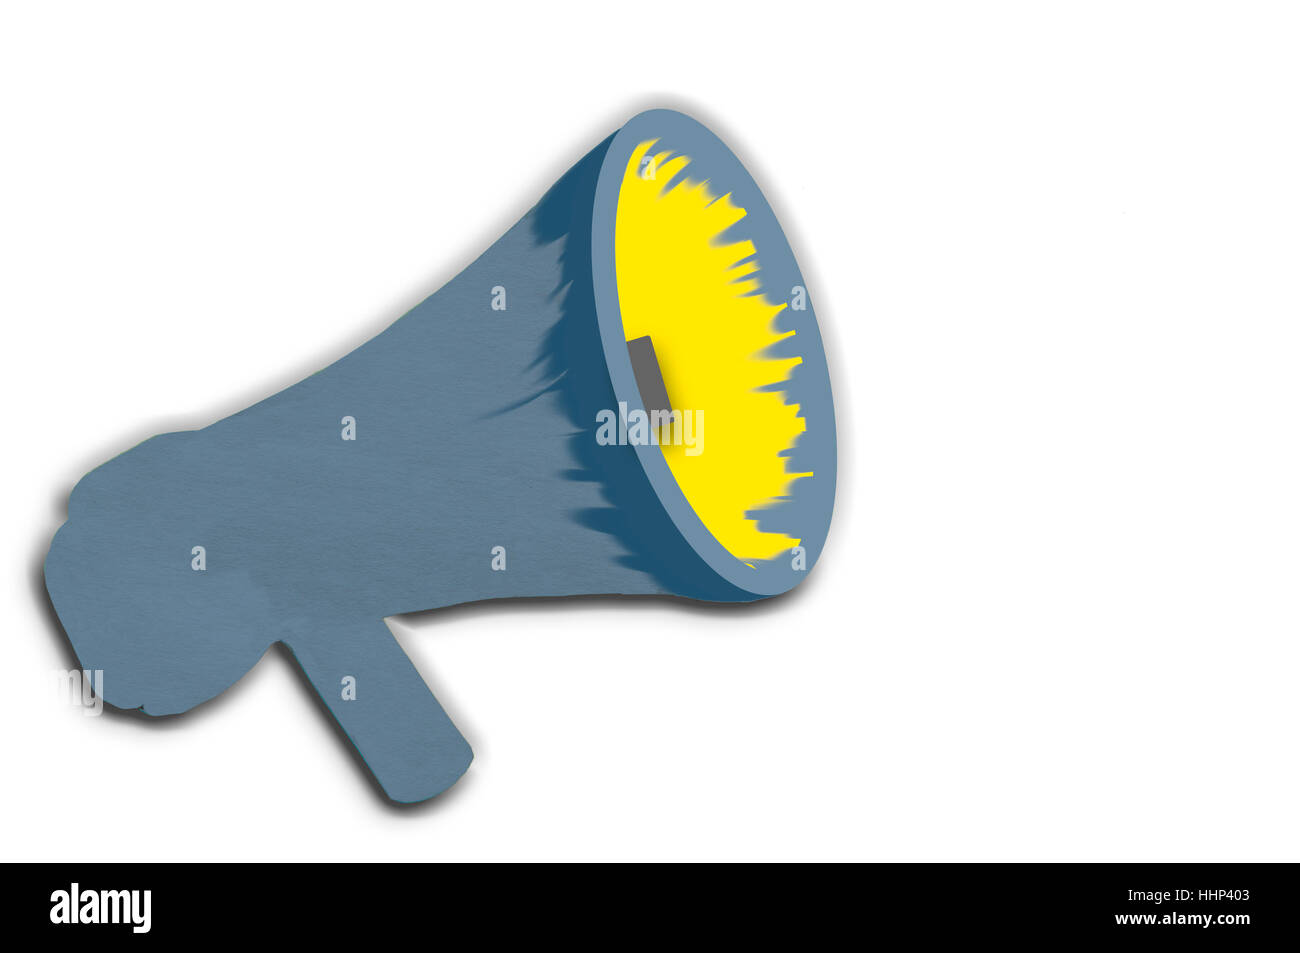 Announcement of important message from a megaphone Stock Photo